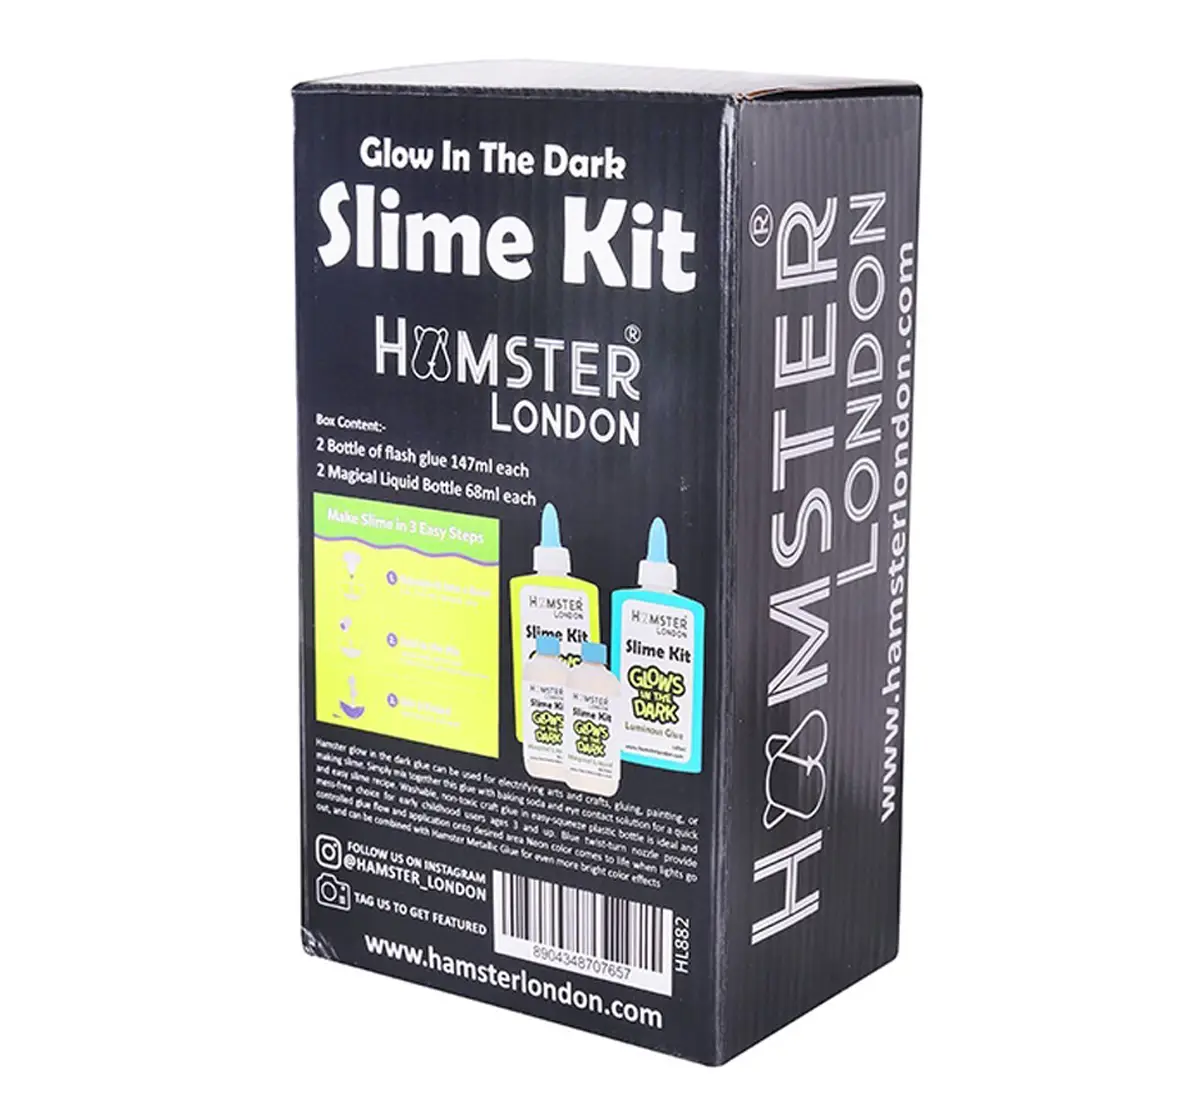 Glow In The Dark Slime Kit by Hamster London for Kids,Use for Electrifying Arts & Crafts, 3Y+